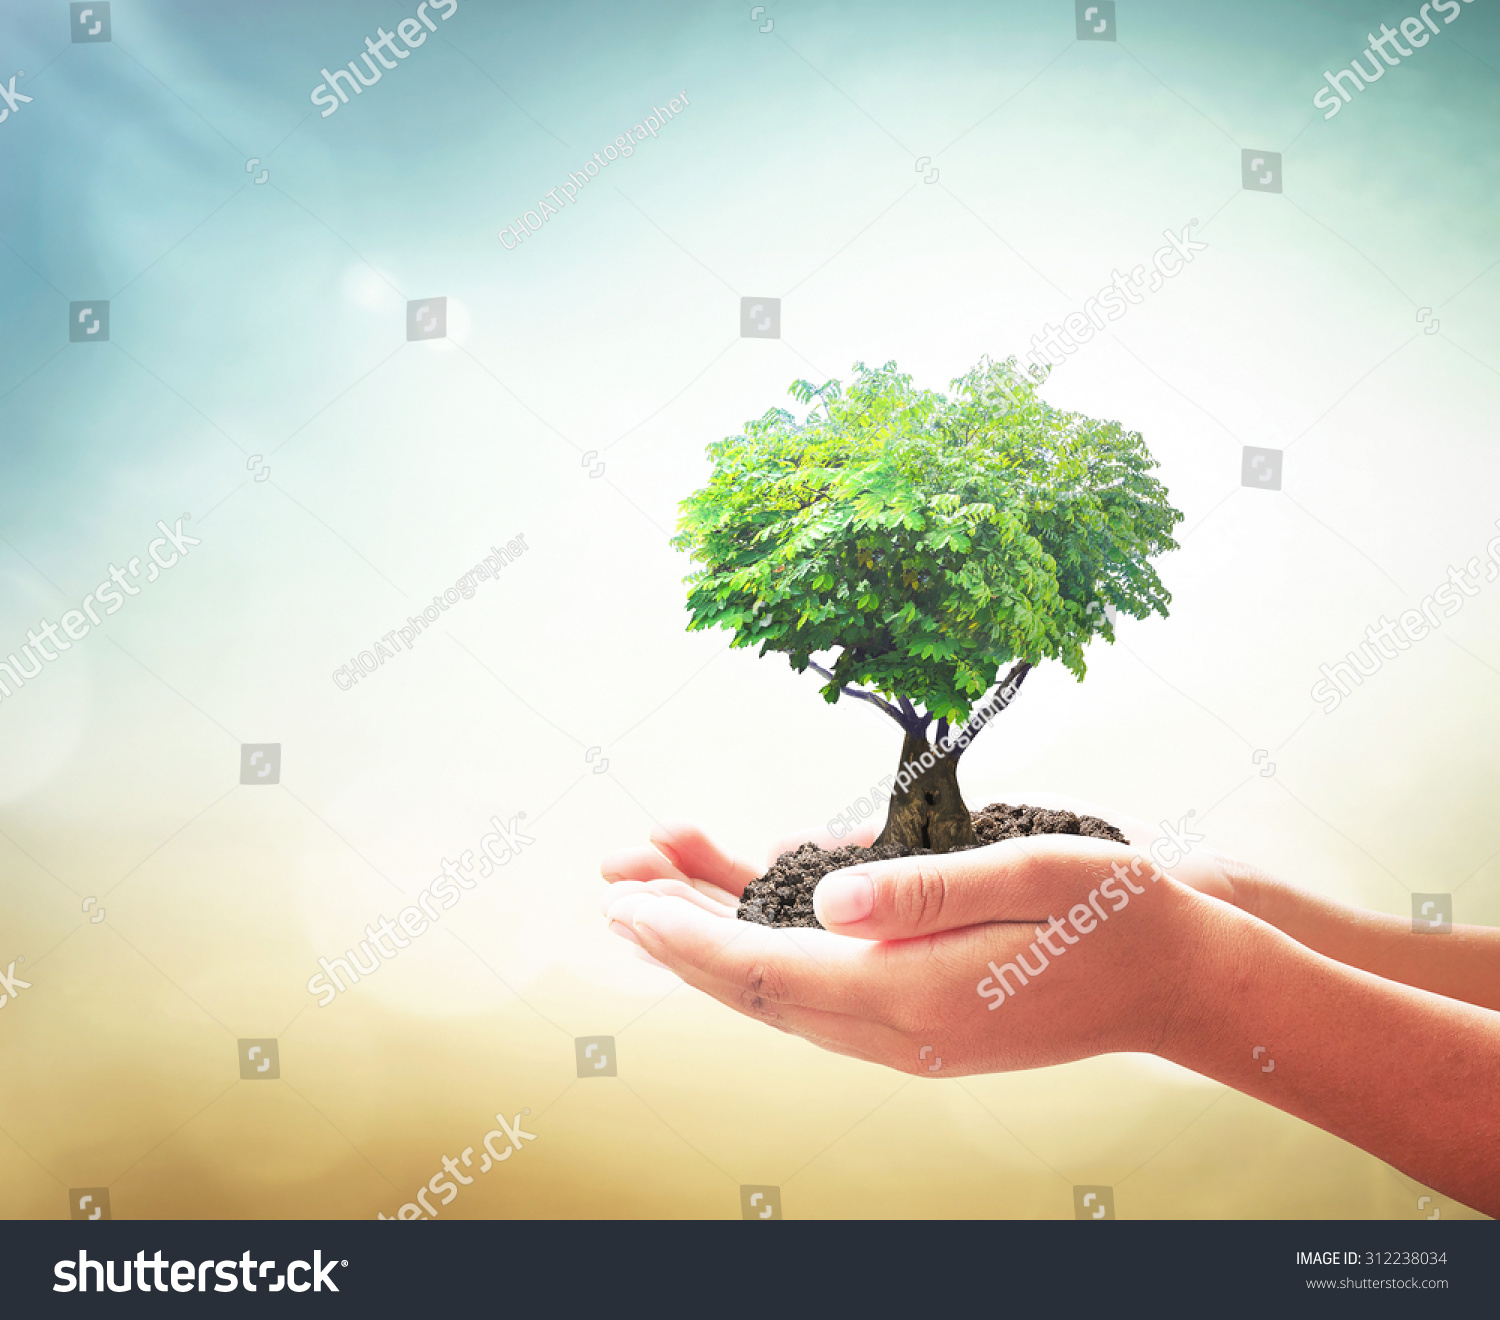 World environment day concept: Human hands holding fruitful tree in heart shape on blurred green nature sunset background #312238034